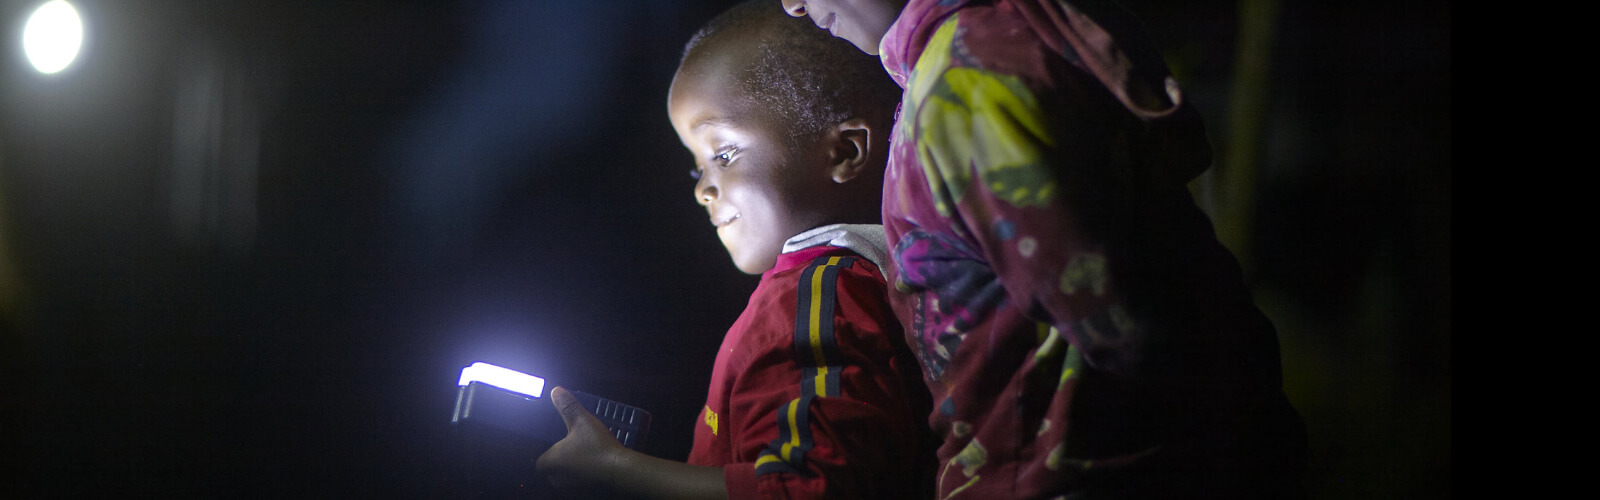 a child looking at a glowing handheld device in the dark